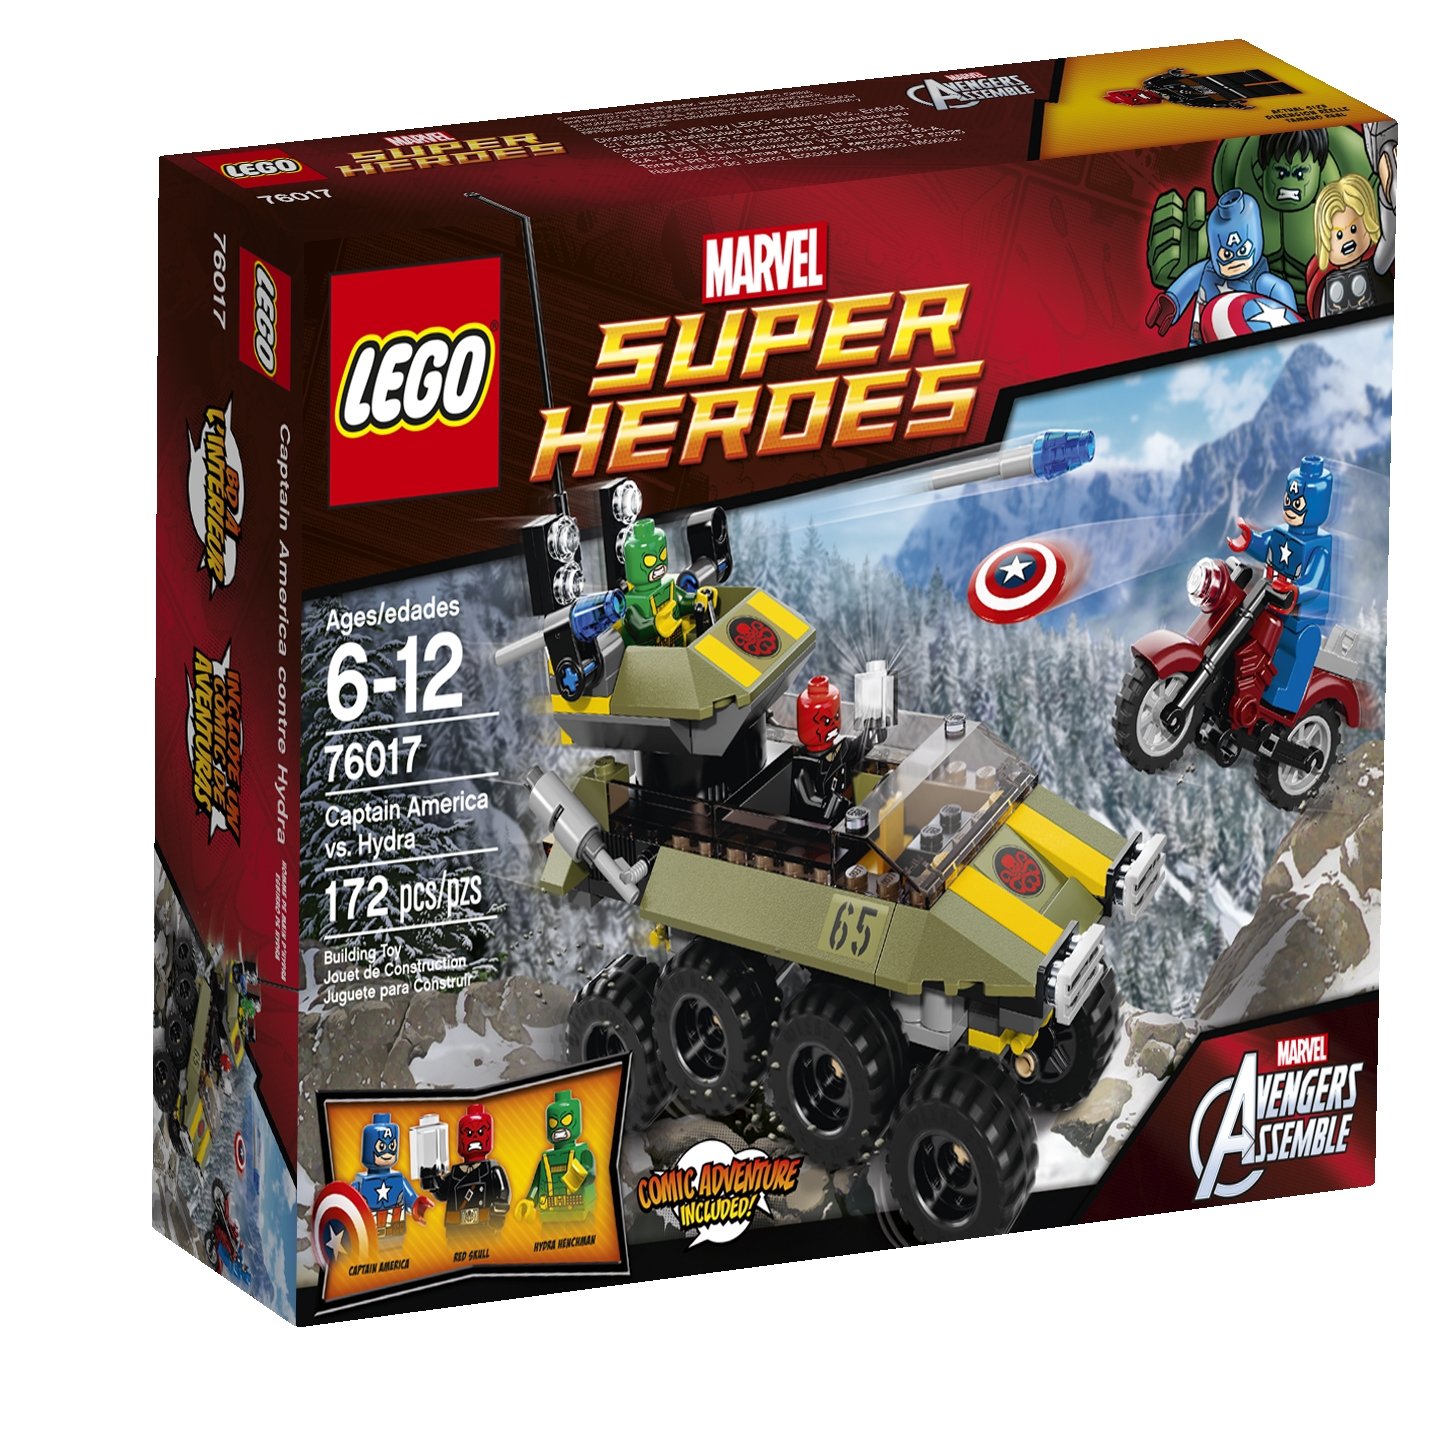 Top 9 Best LEGO Captain America Sets Reviews in 2022 5